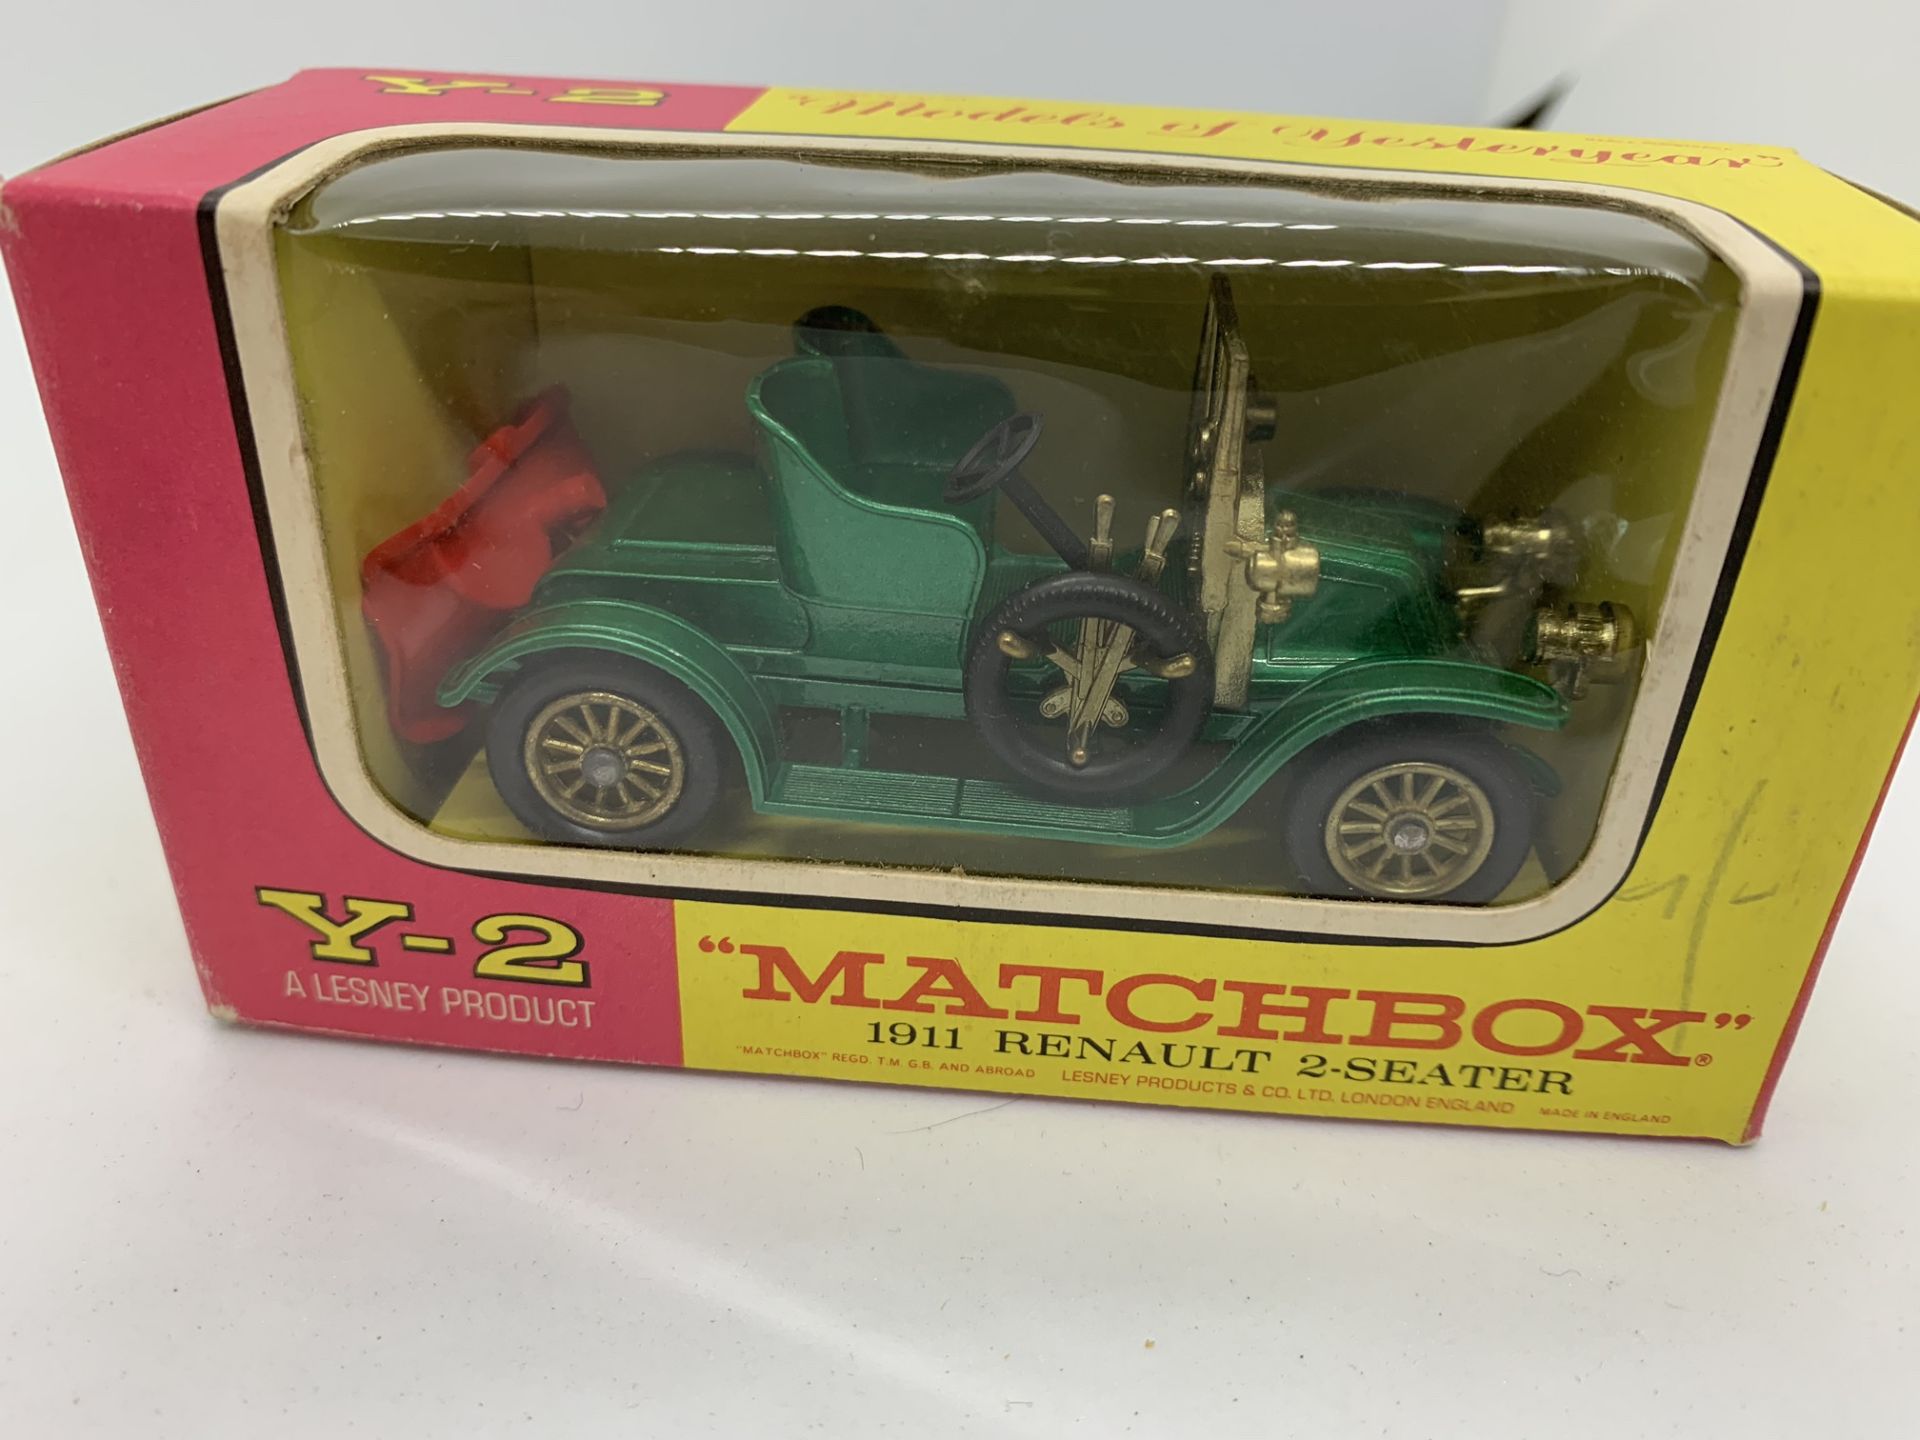 BOXED MATCHBOX Y2 1911 RENAULT 2 SEATER